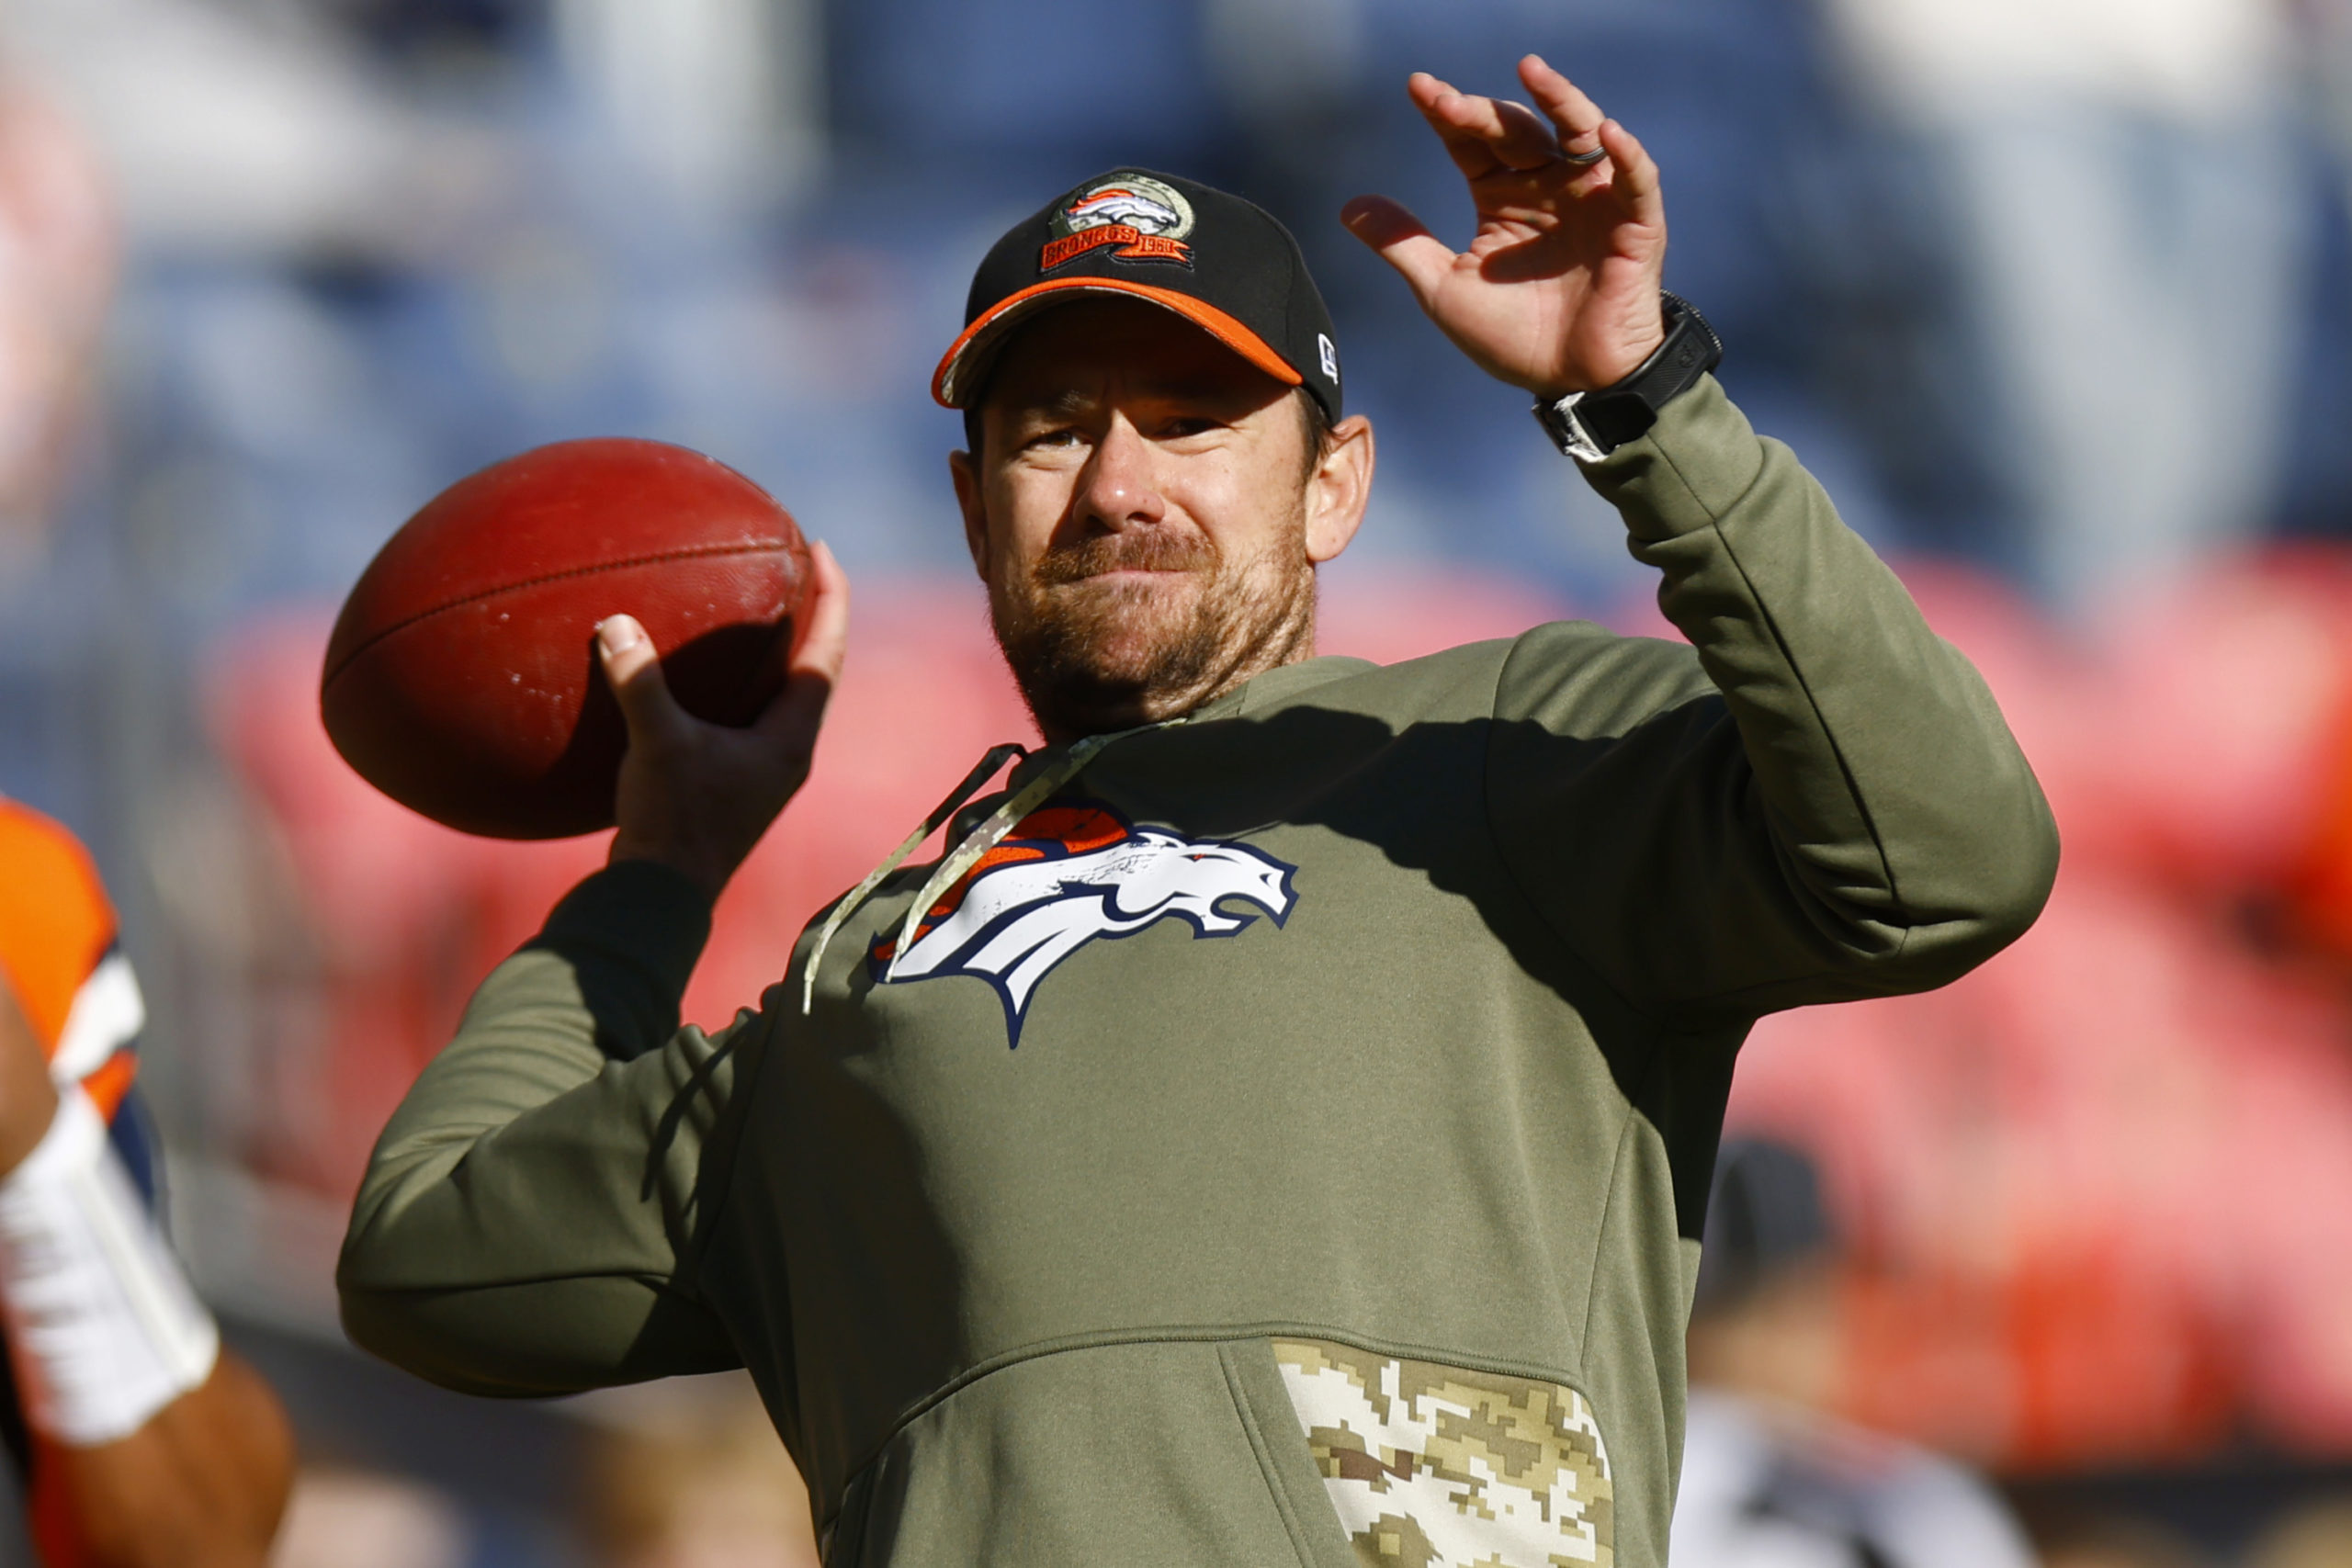 DENVER, COLORADO - NOVEMBER 20: Klint Kubiak quarterbacks coach for the Denver Broncos throws a pass during warmups prior to a game against the Las Vegas Raiders at Empower Field At Mile High on November 20, 2022 in Denver, Colorado. Justin Edmonds/Getty Images